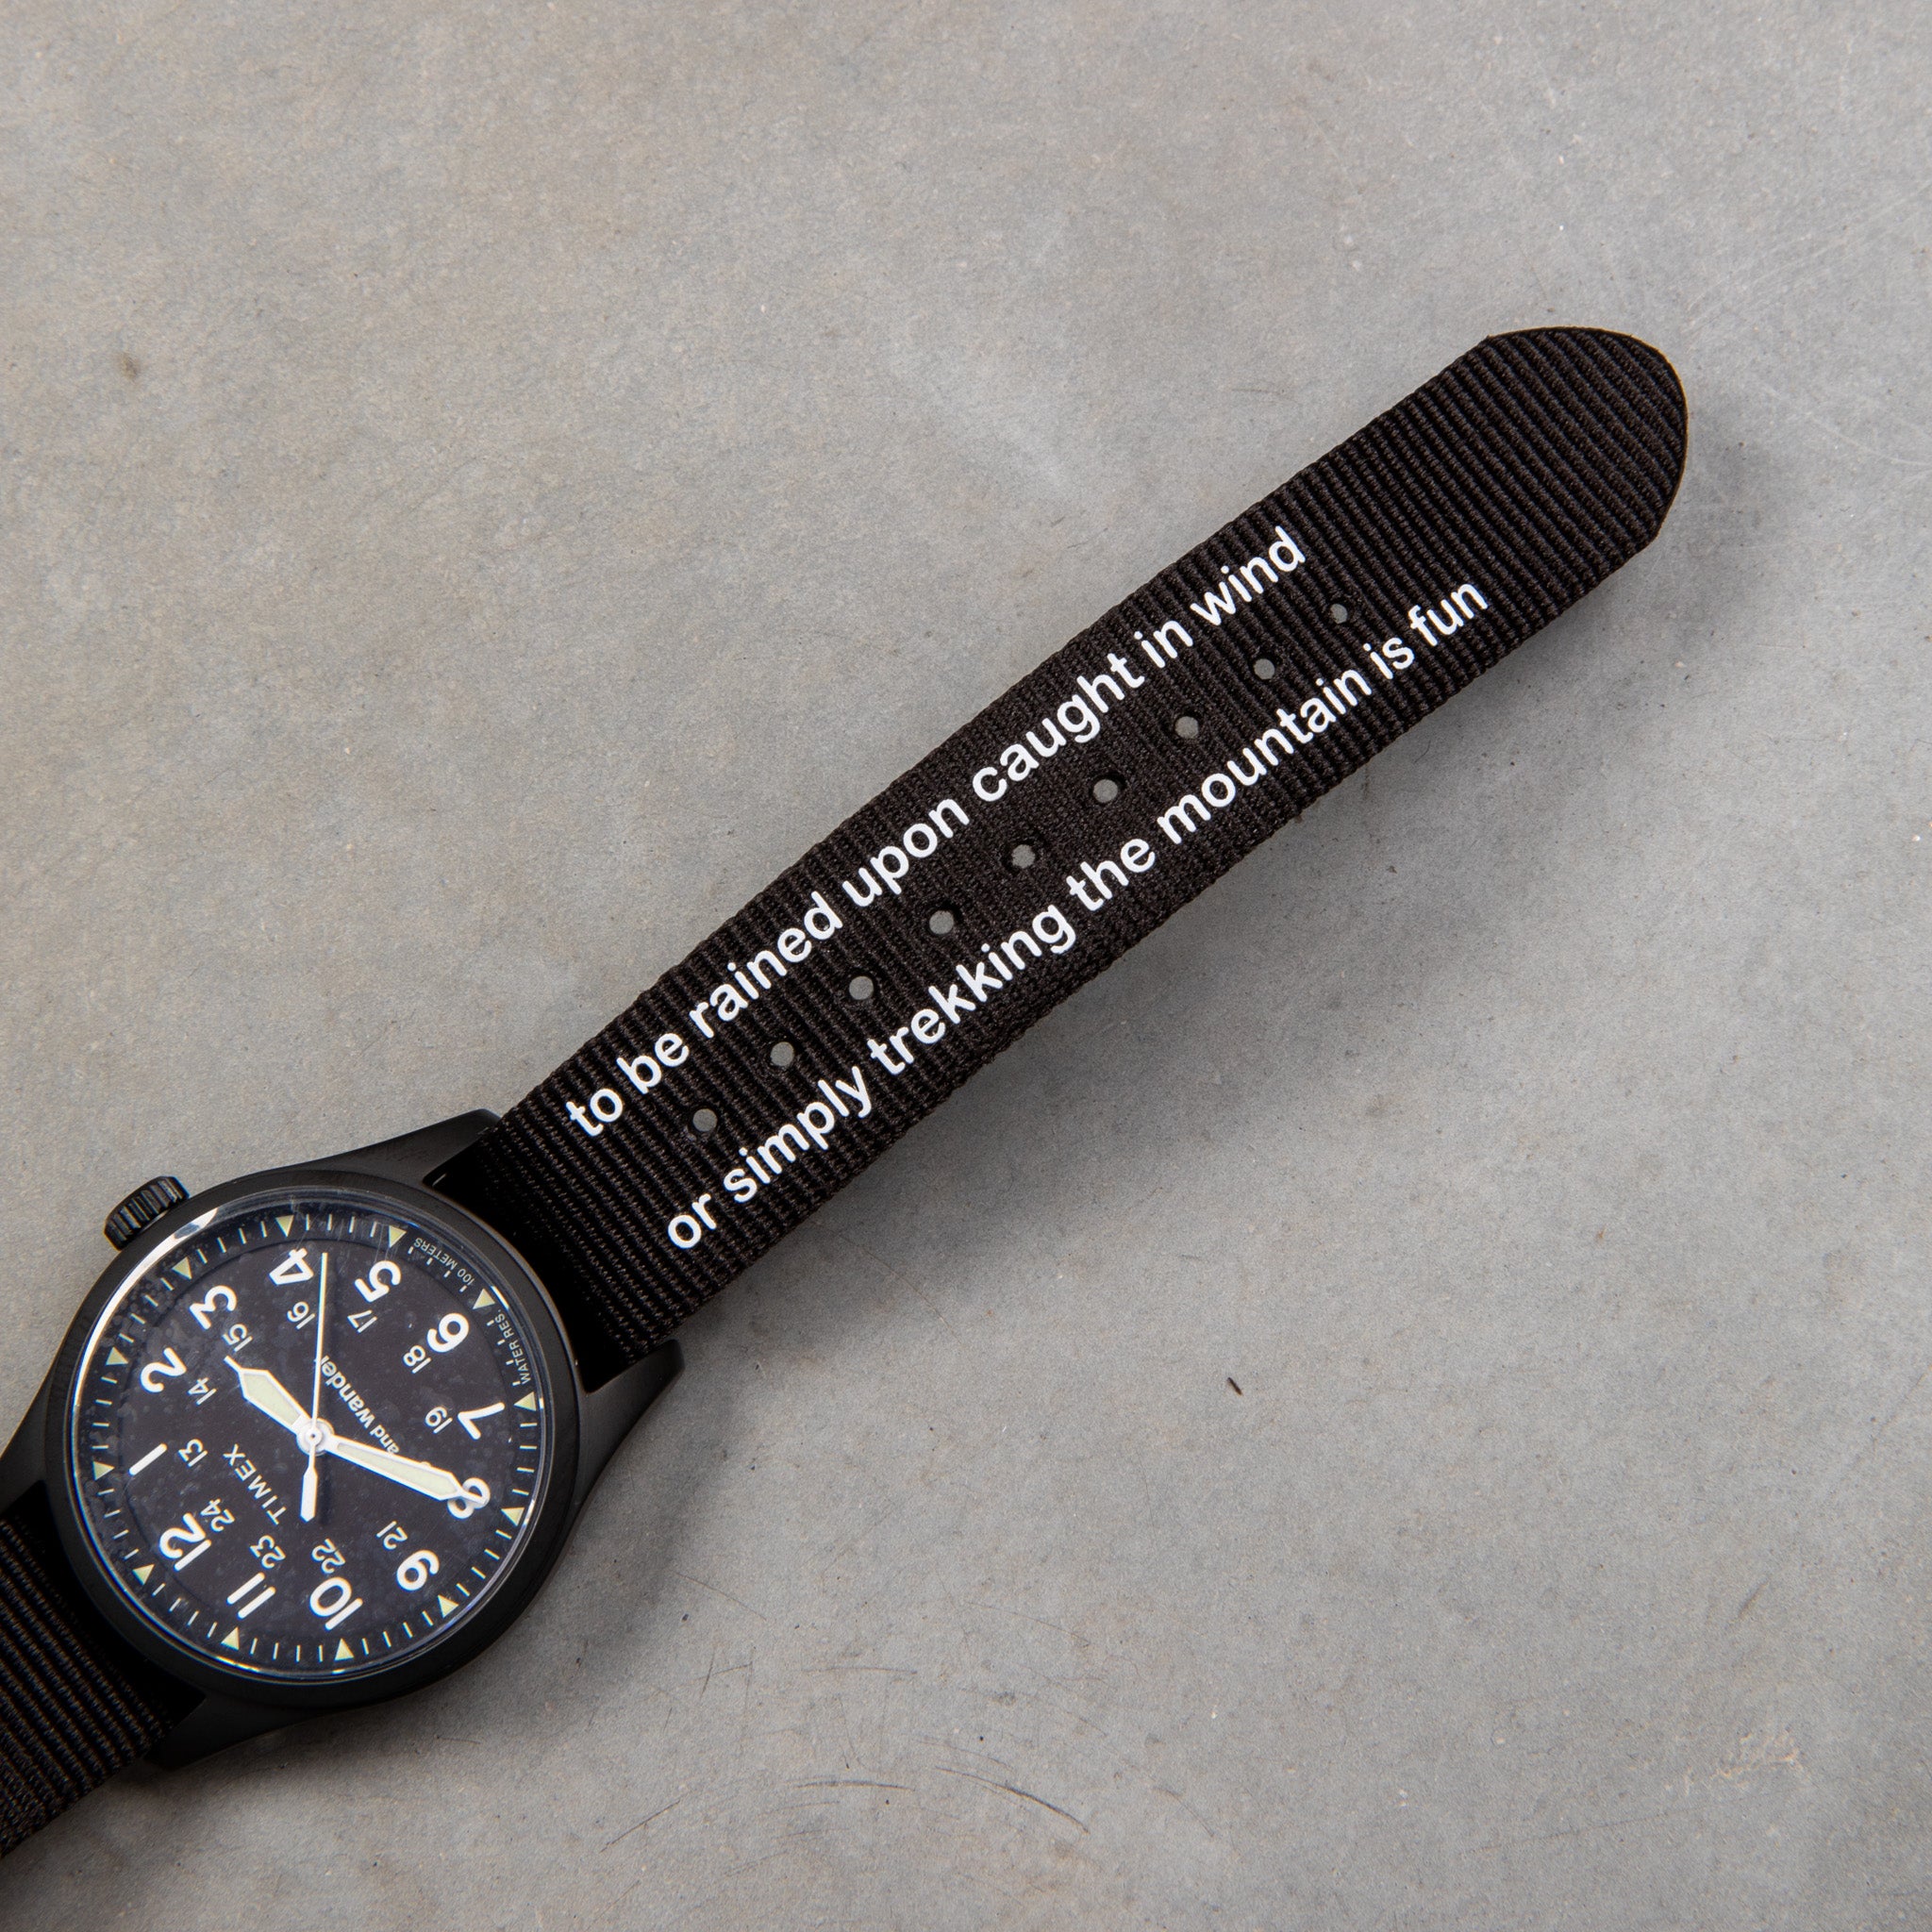 And Wander x TIMEX Expedition North Field Post Solar Watch Black